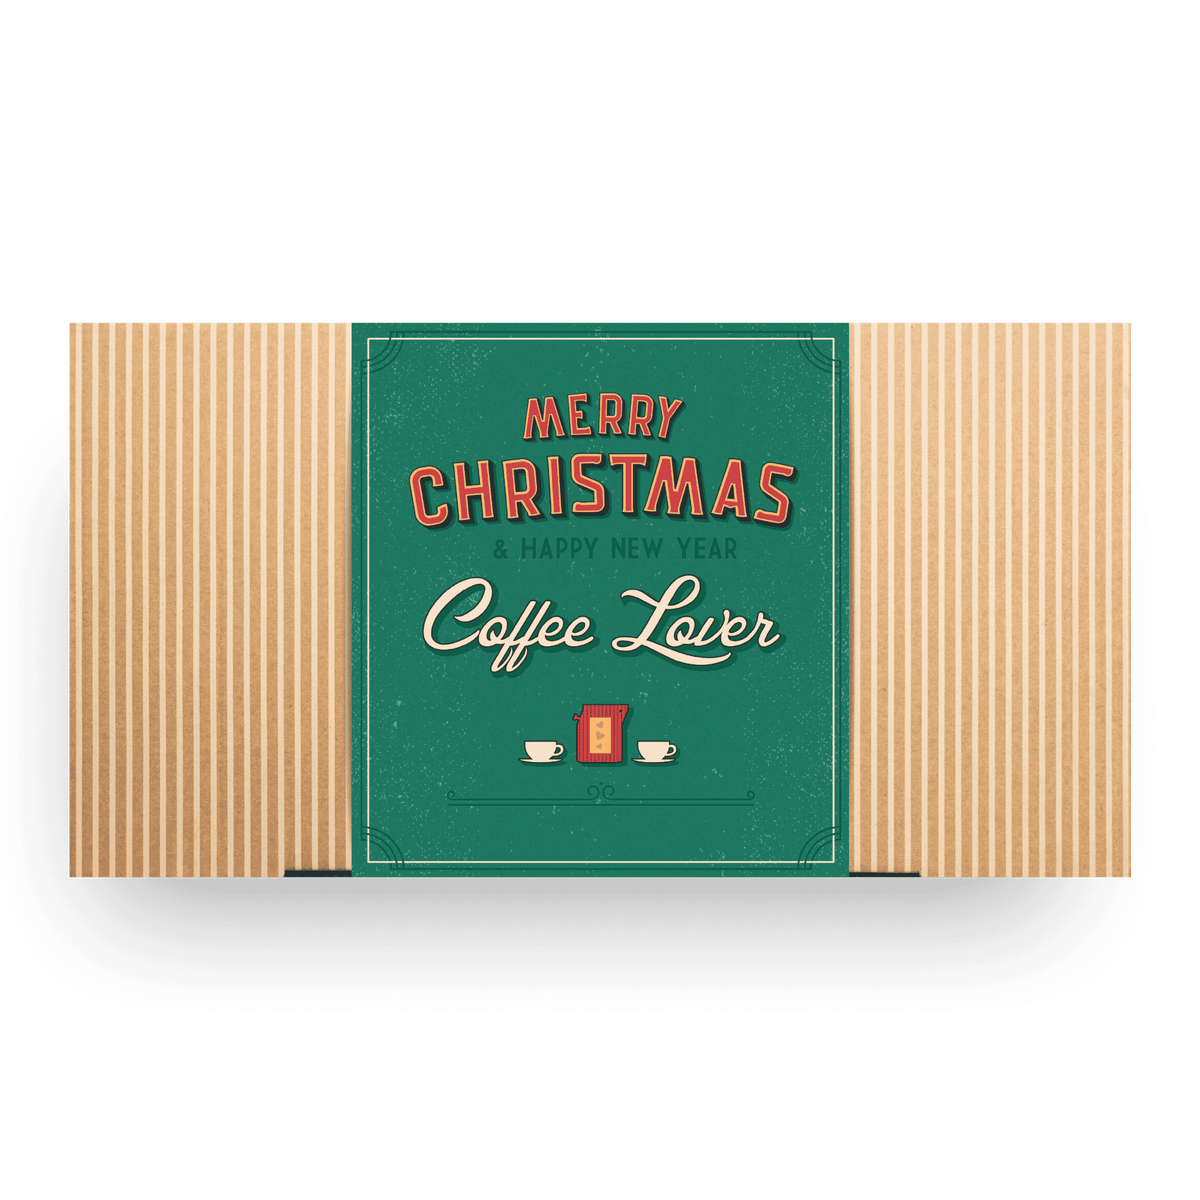 MERRY CHRISTMAS RETRO COFFEE GIFT BOX Gift Boxes The Brew Company